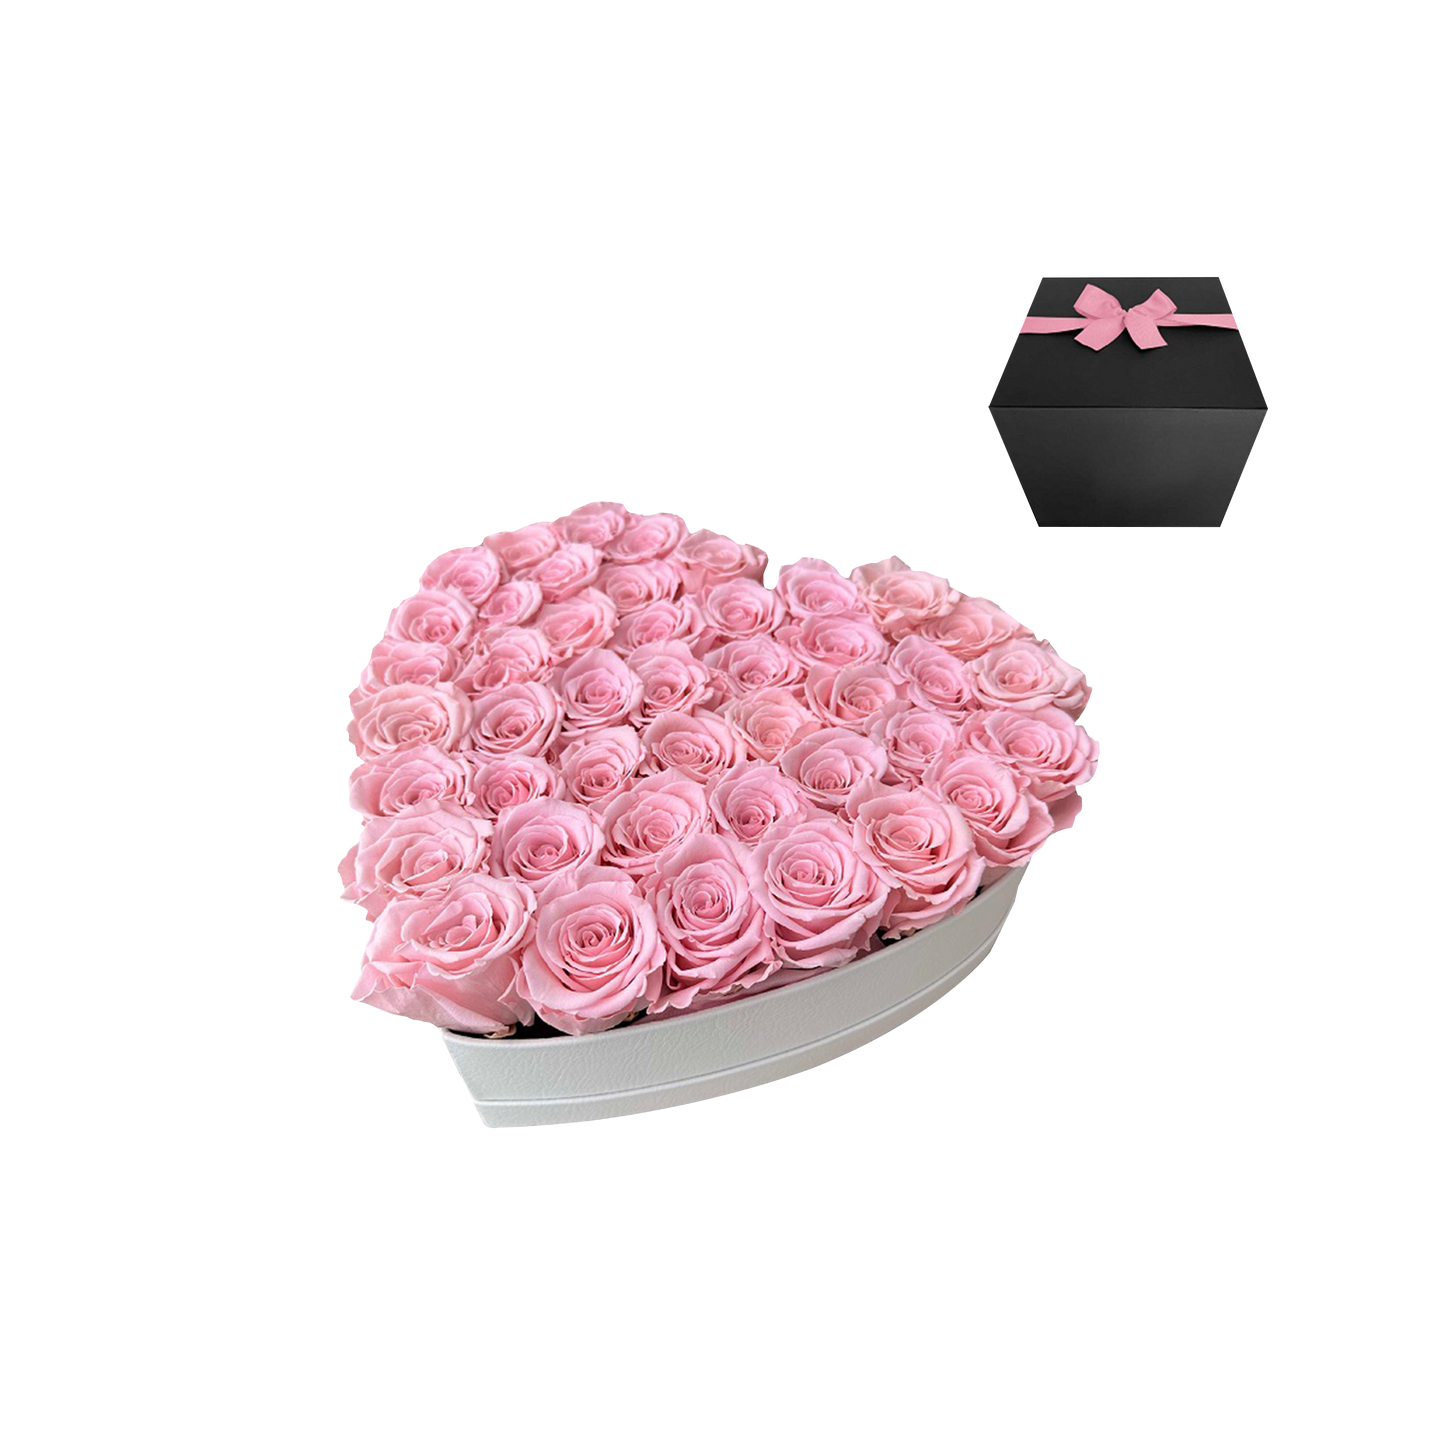 LUXURY 44-46 PRESERVED ROSES ARRANGEMENT - HEART PU LEATHER BOX